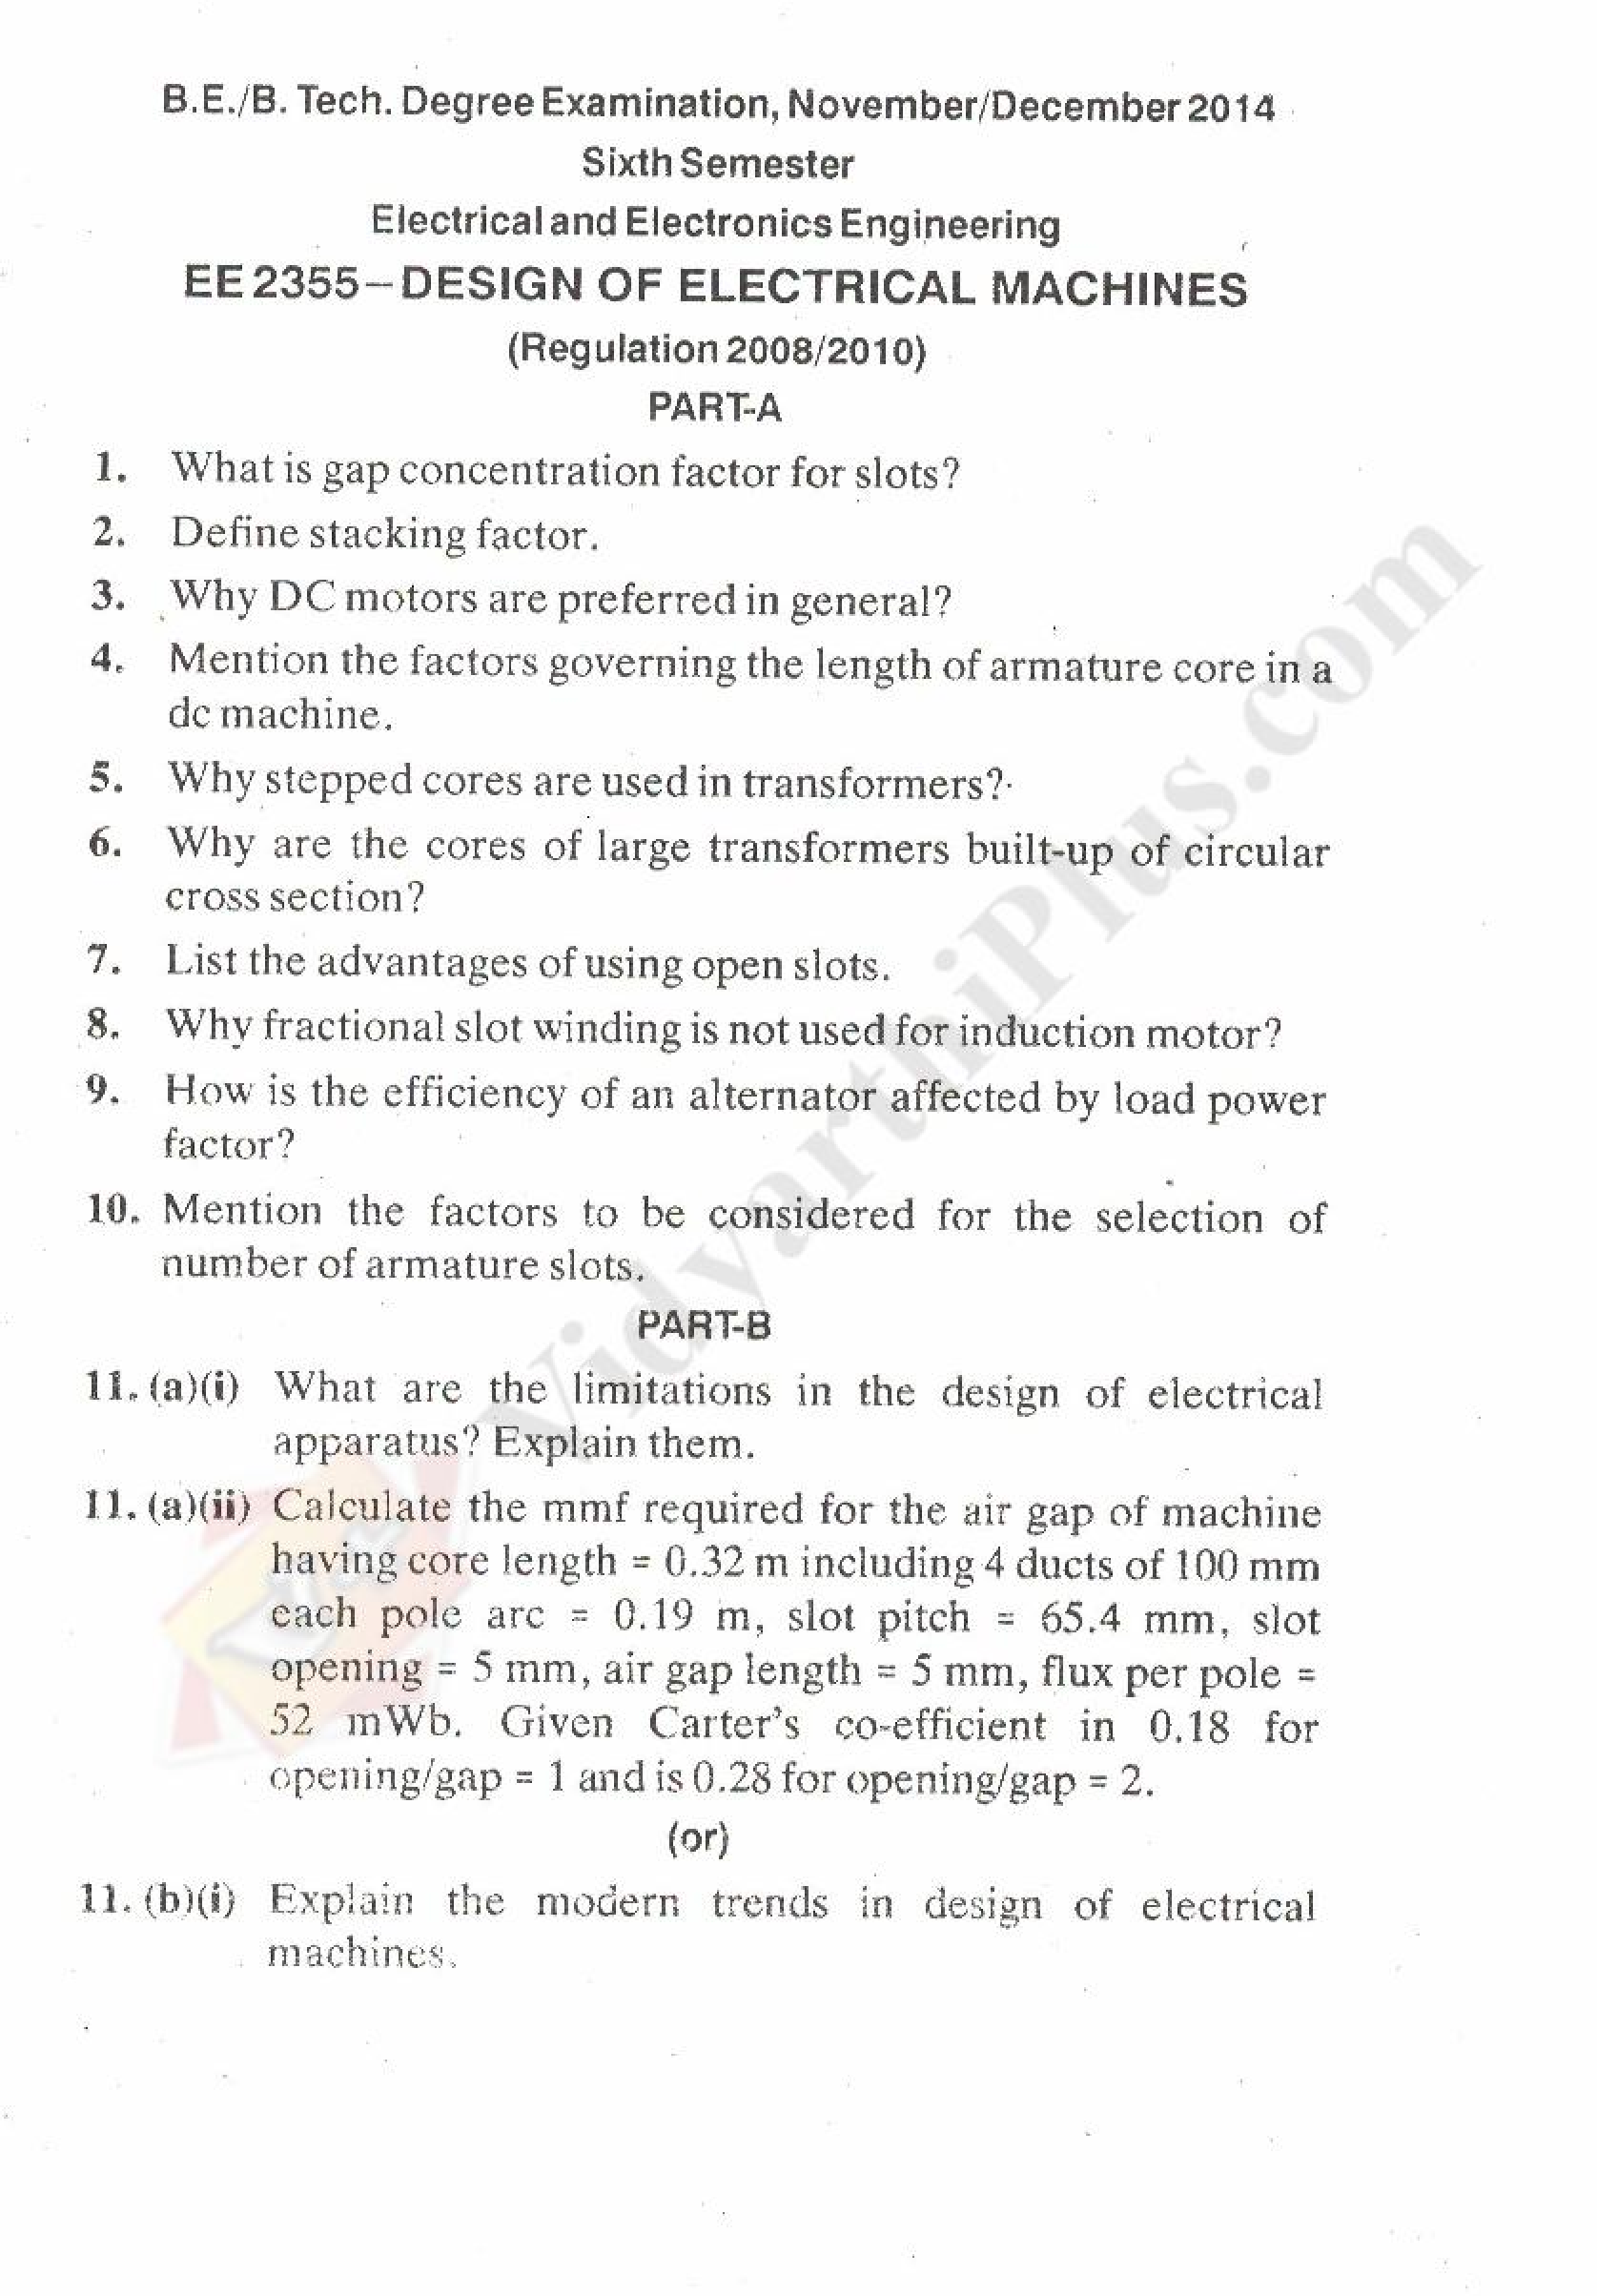 Design of Electrical Machines Solved Question Papers - 2015 Edition (Anna University)